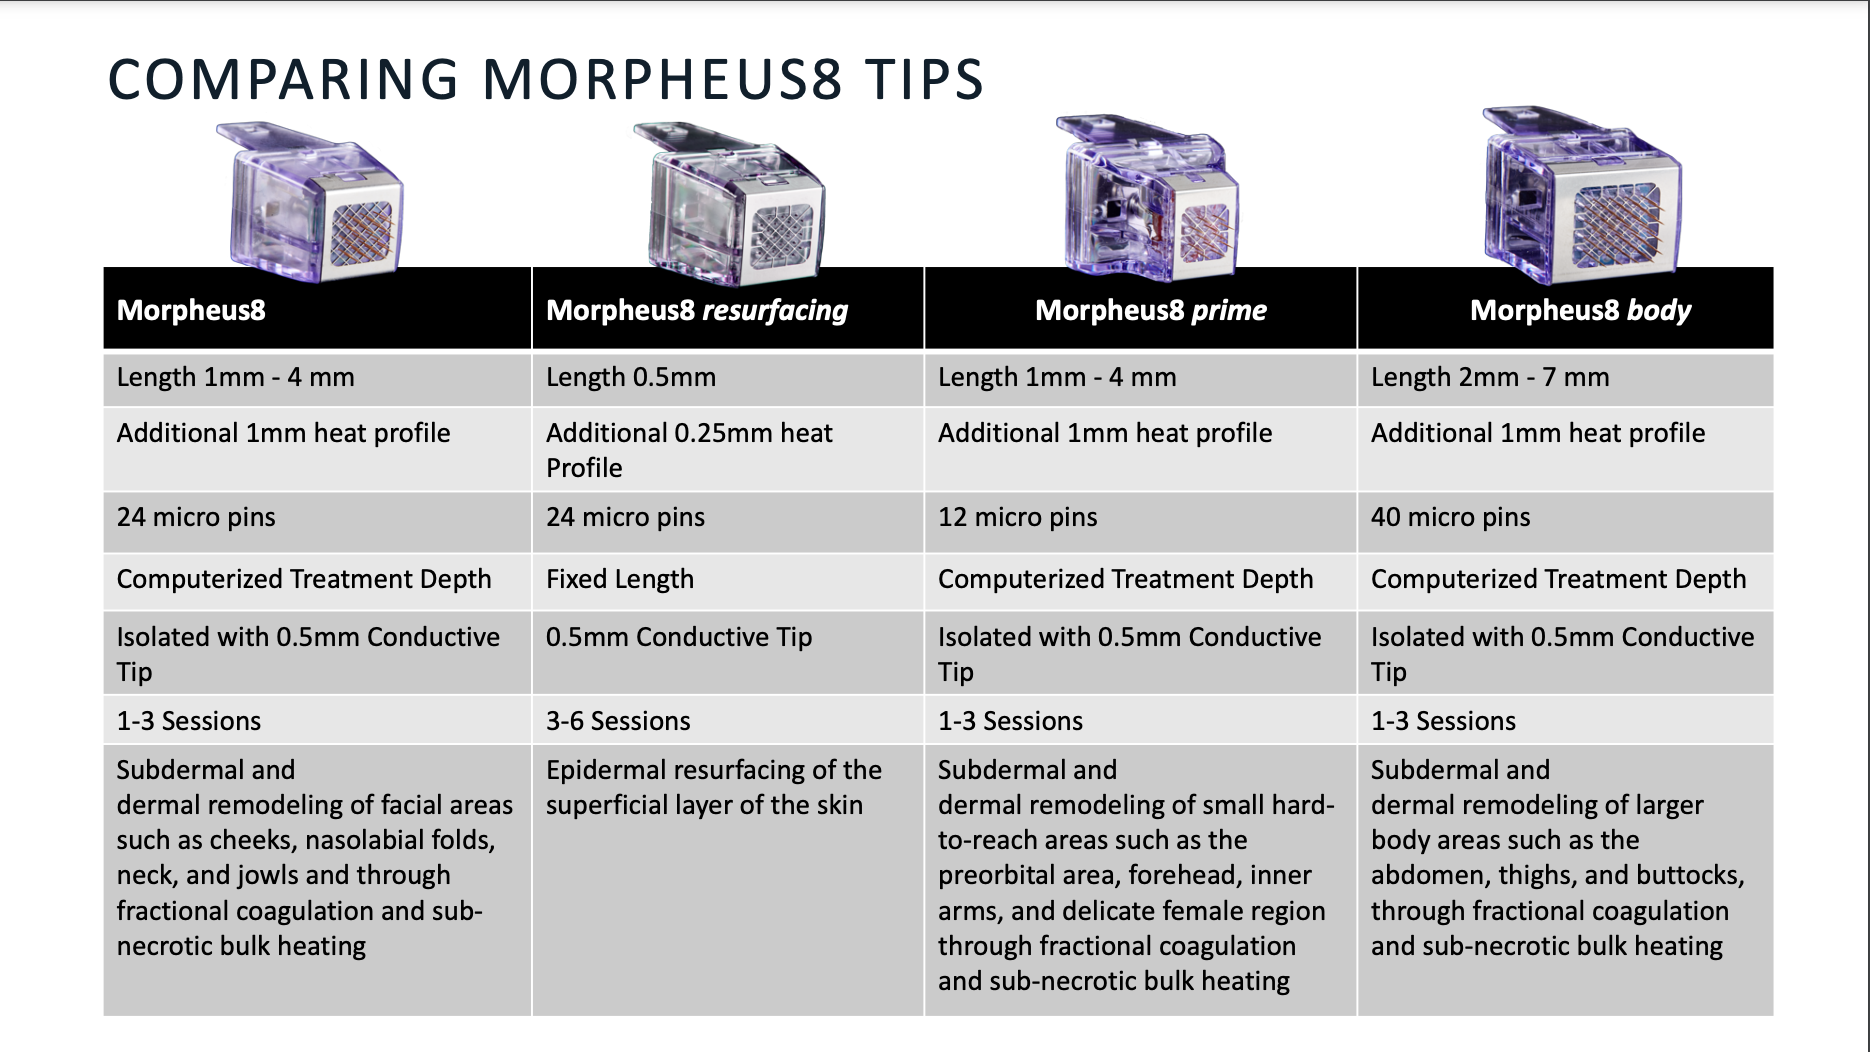 an image showing the different morpheus8 tips